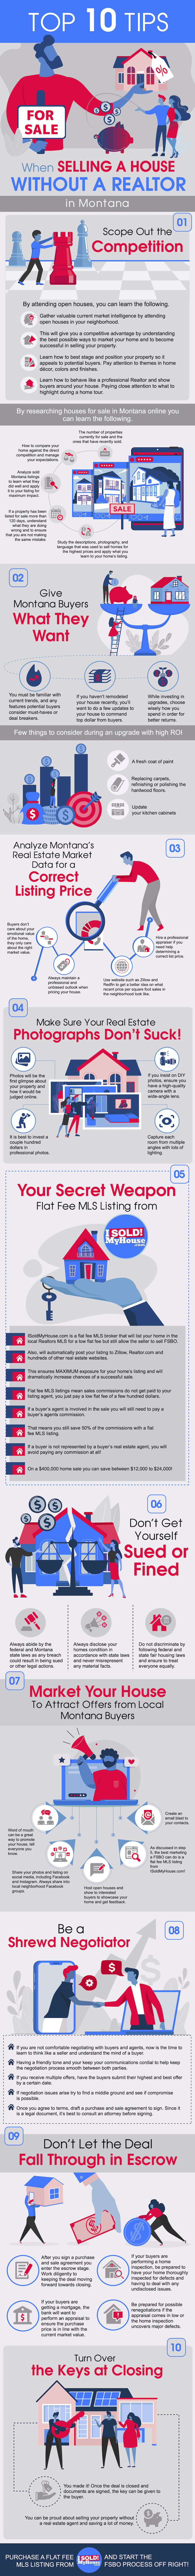 infographic of the 10 steps to sell a house in montana without an agent